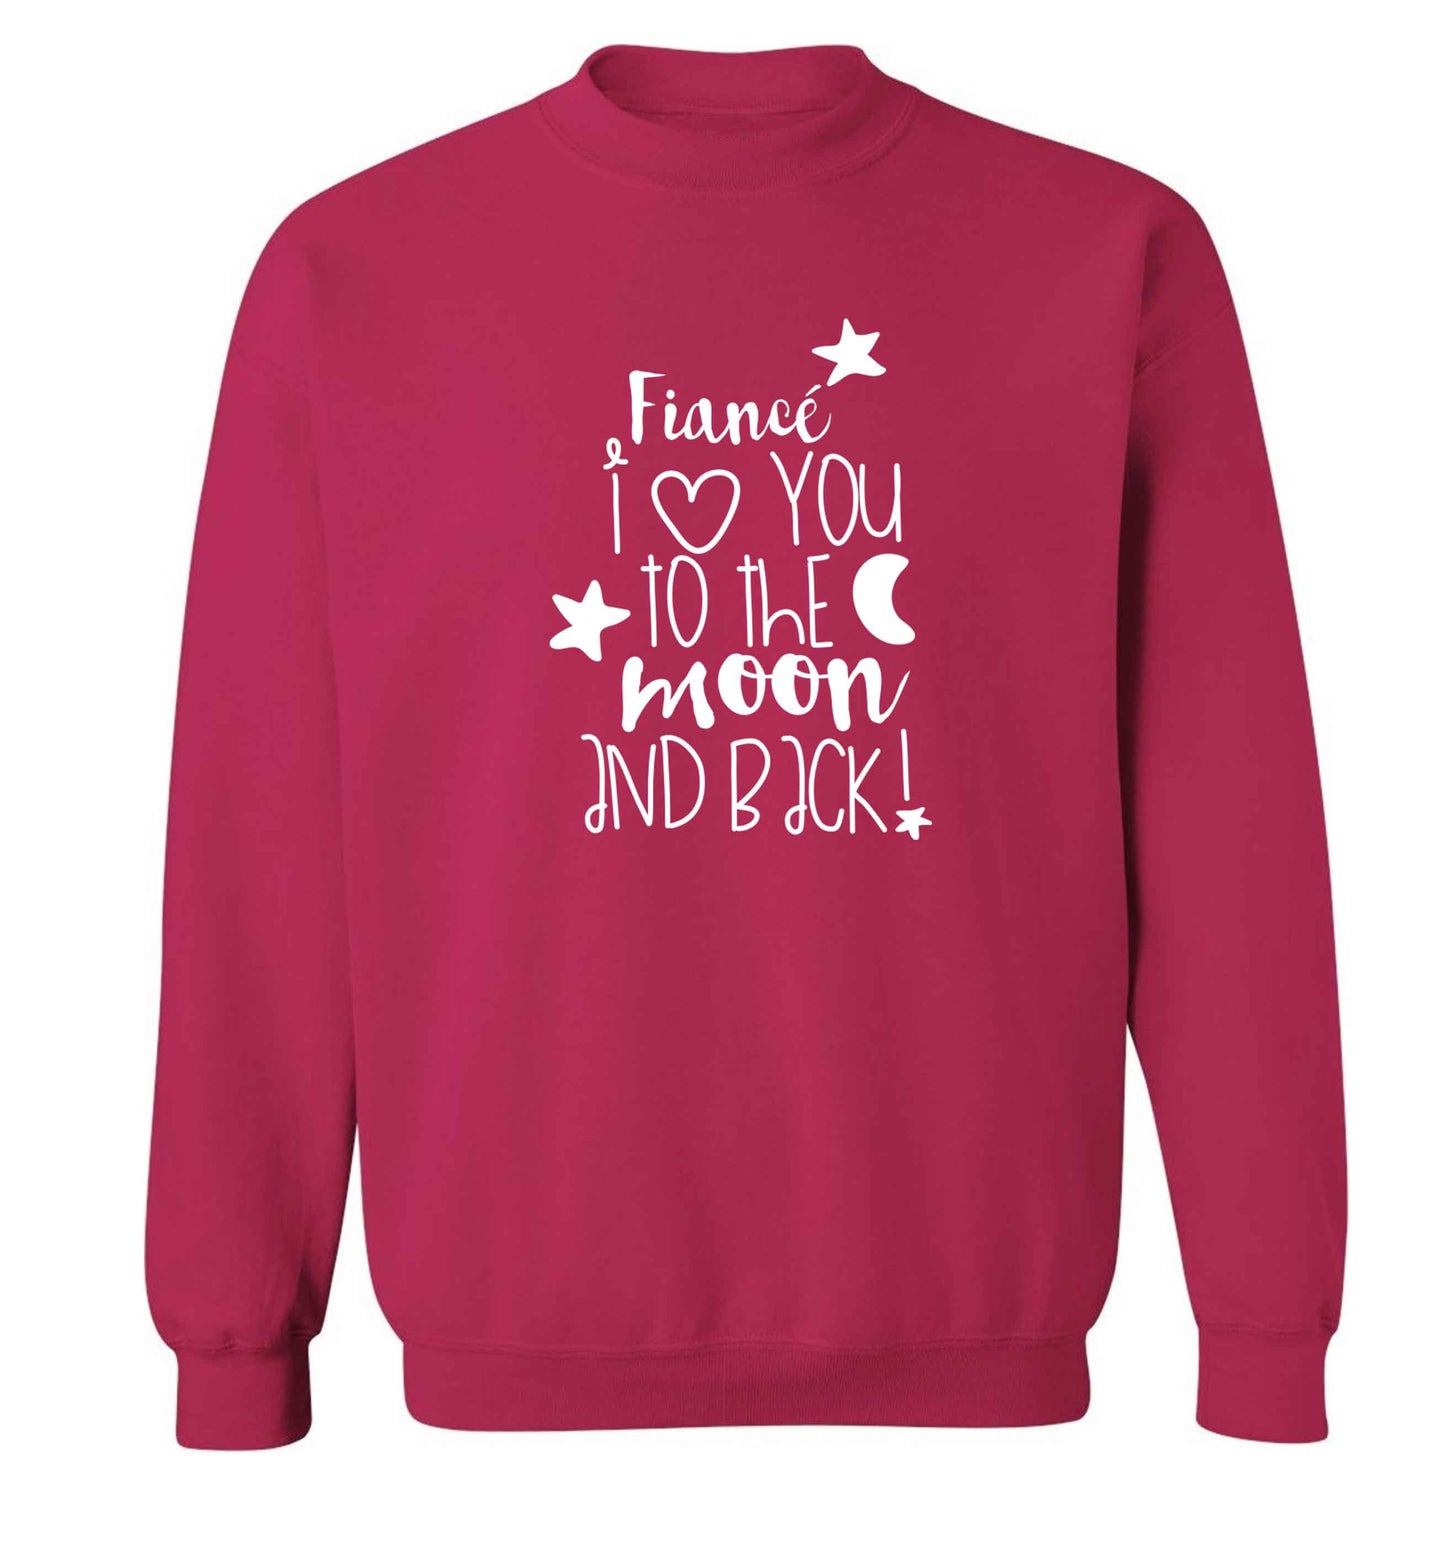 Fiancé I love you to the moon and back adult's unisex pink sweater 2XL